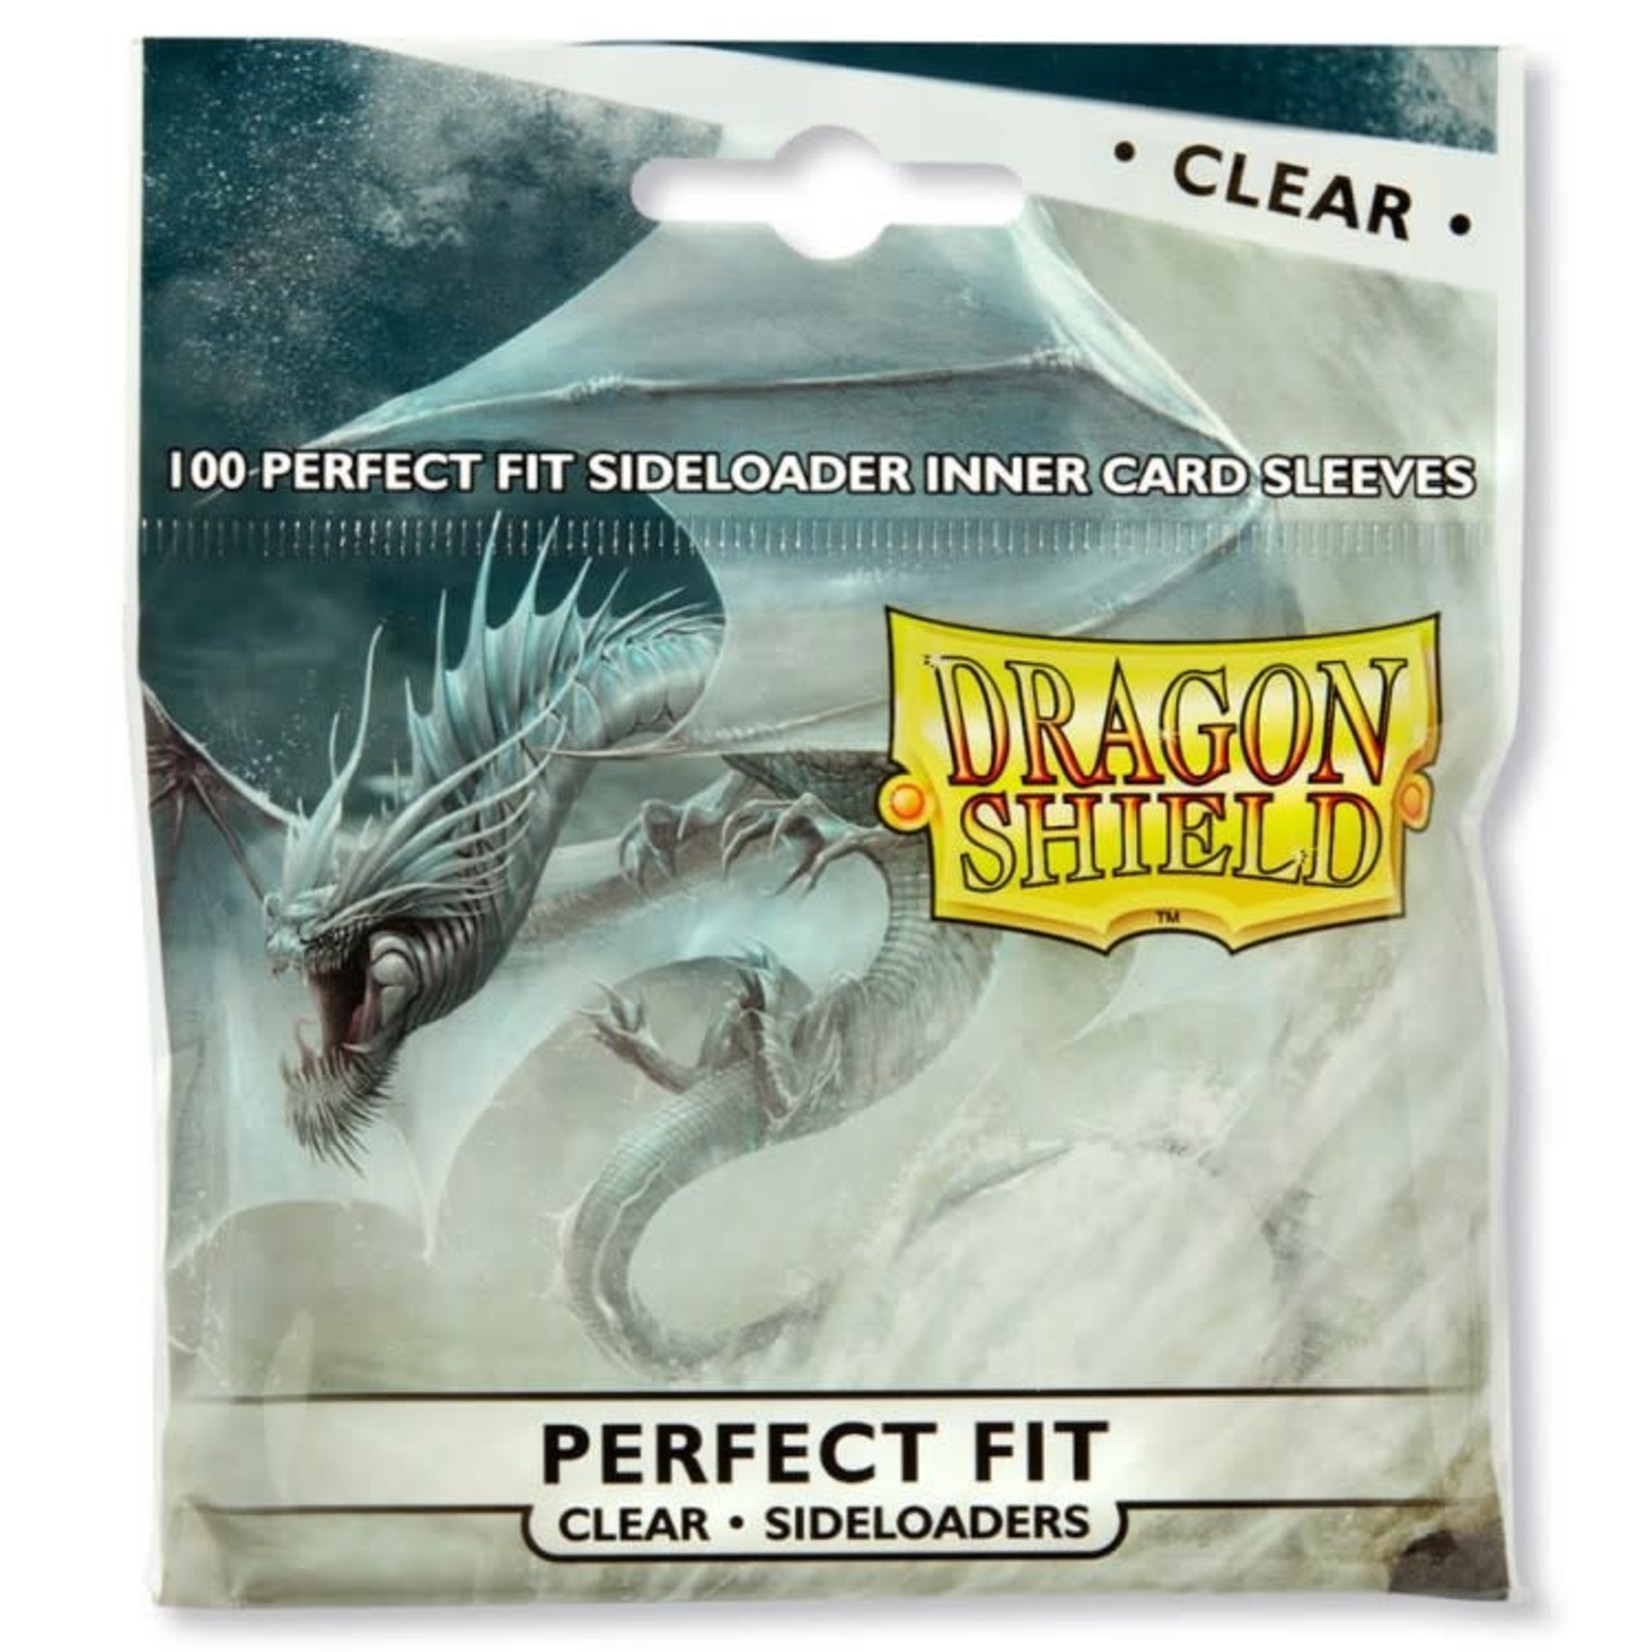 Arcane Tinmen Dragon Shield Perfect Fit Sleeves Sideloaders Clear 100 ct